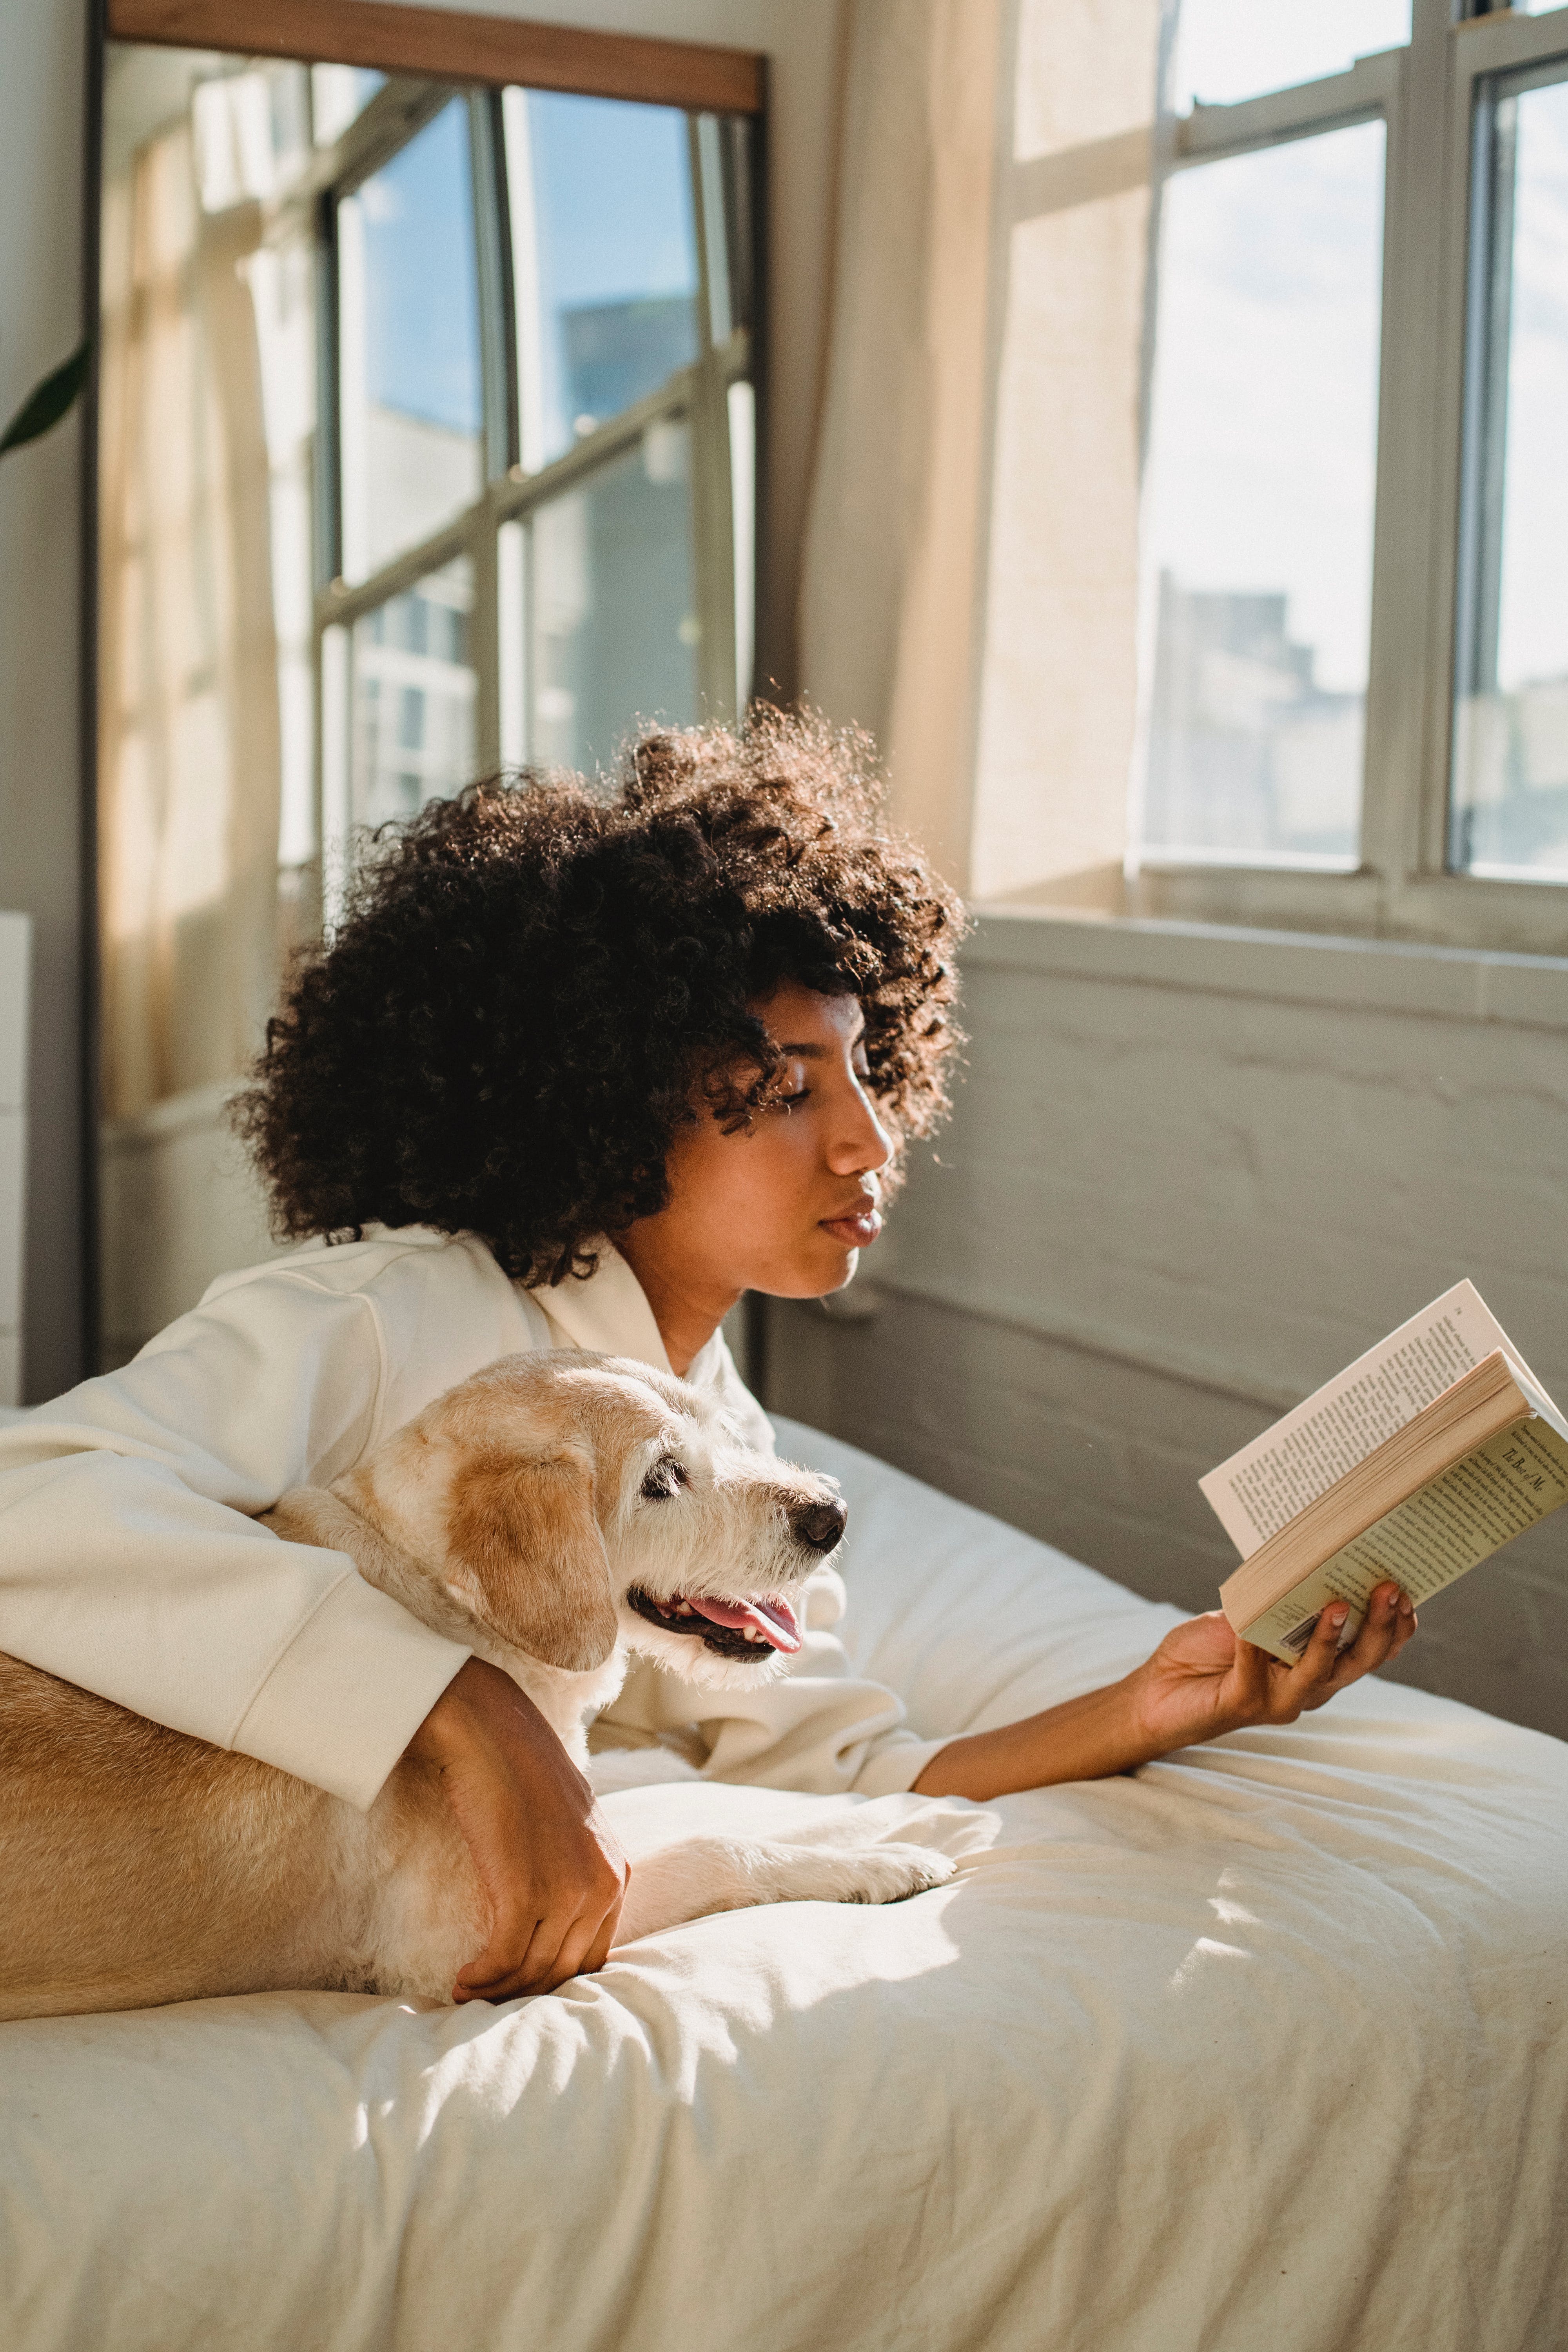 A young woman reading a book while cuddling her dog. | Source: Pexels